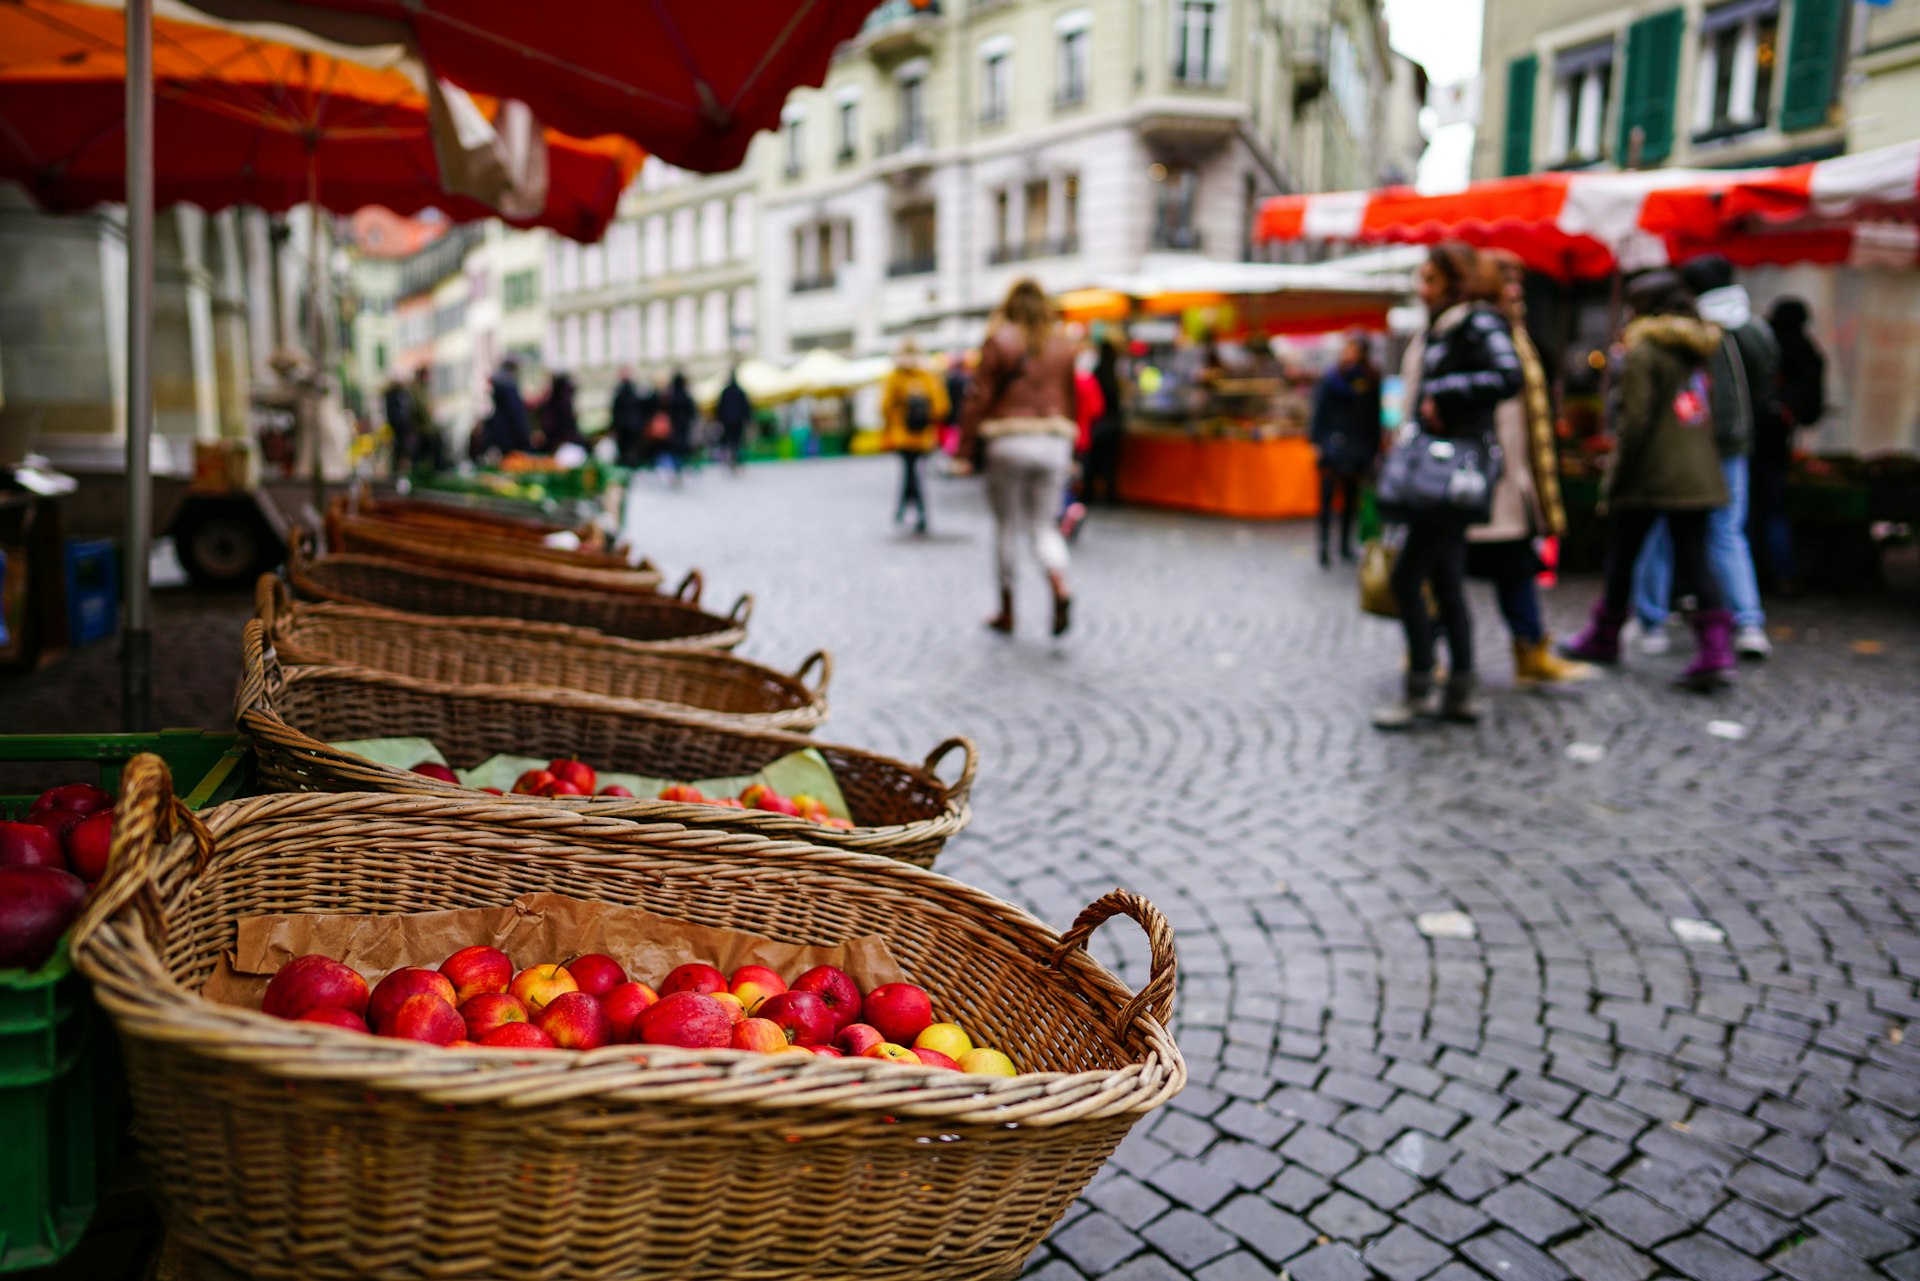 A fruit and veg stall in a cobbled city square on market day as people walk by